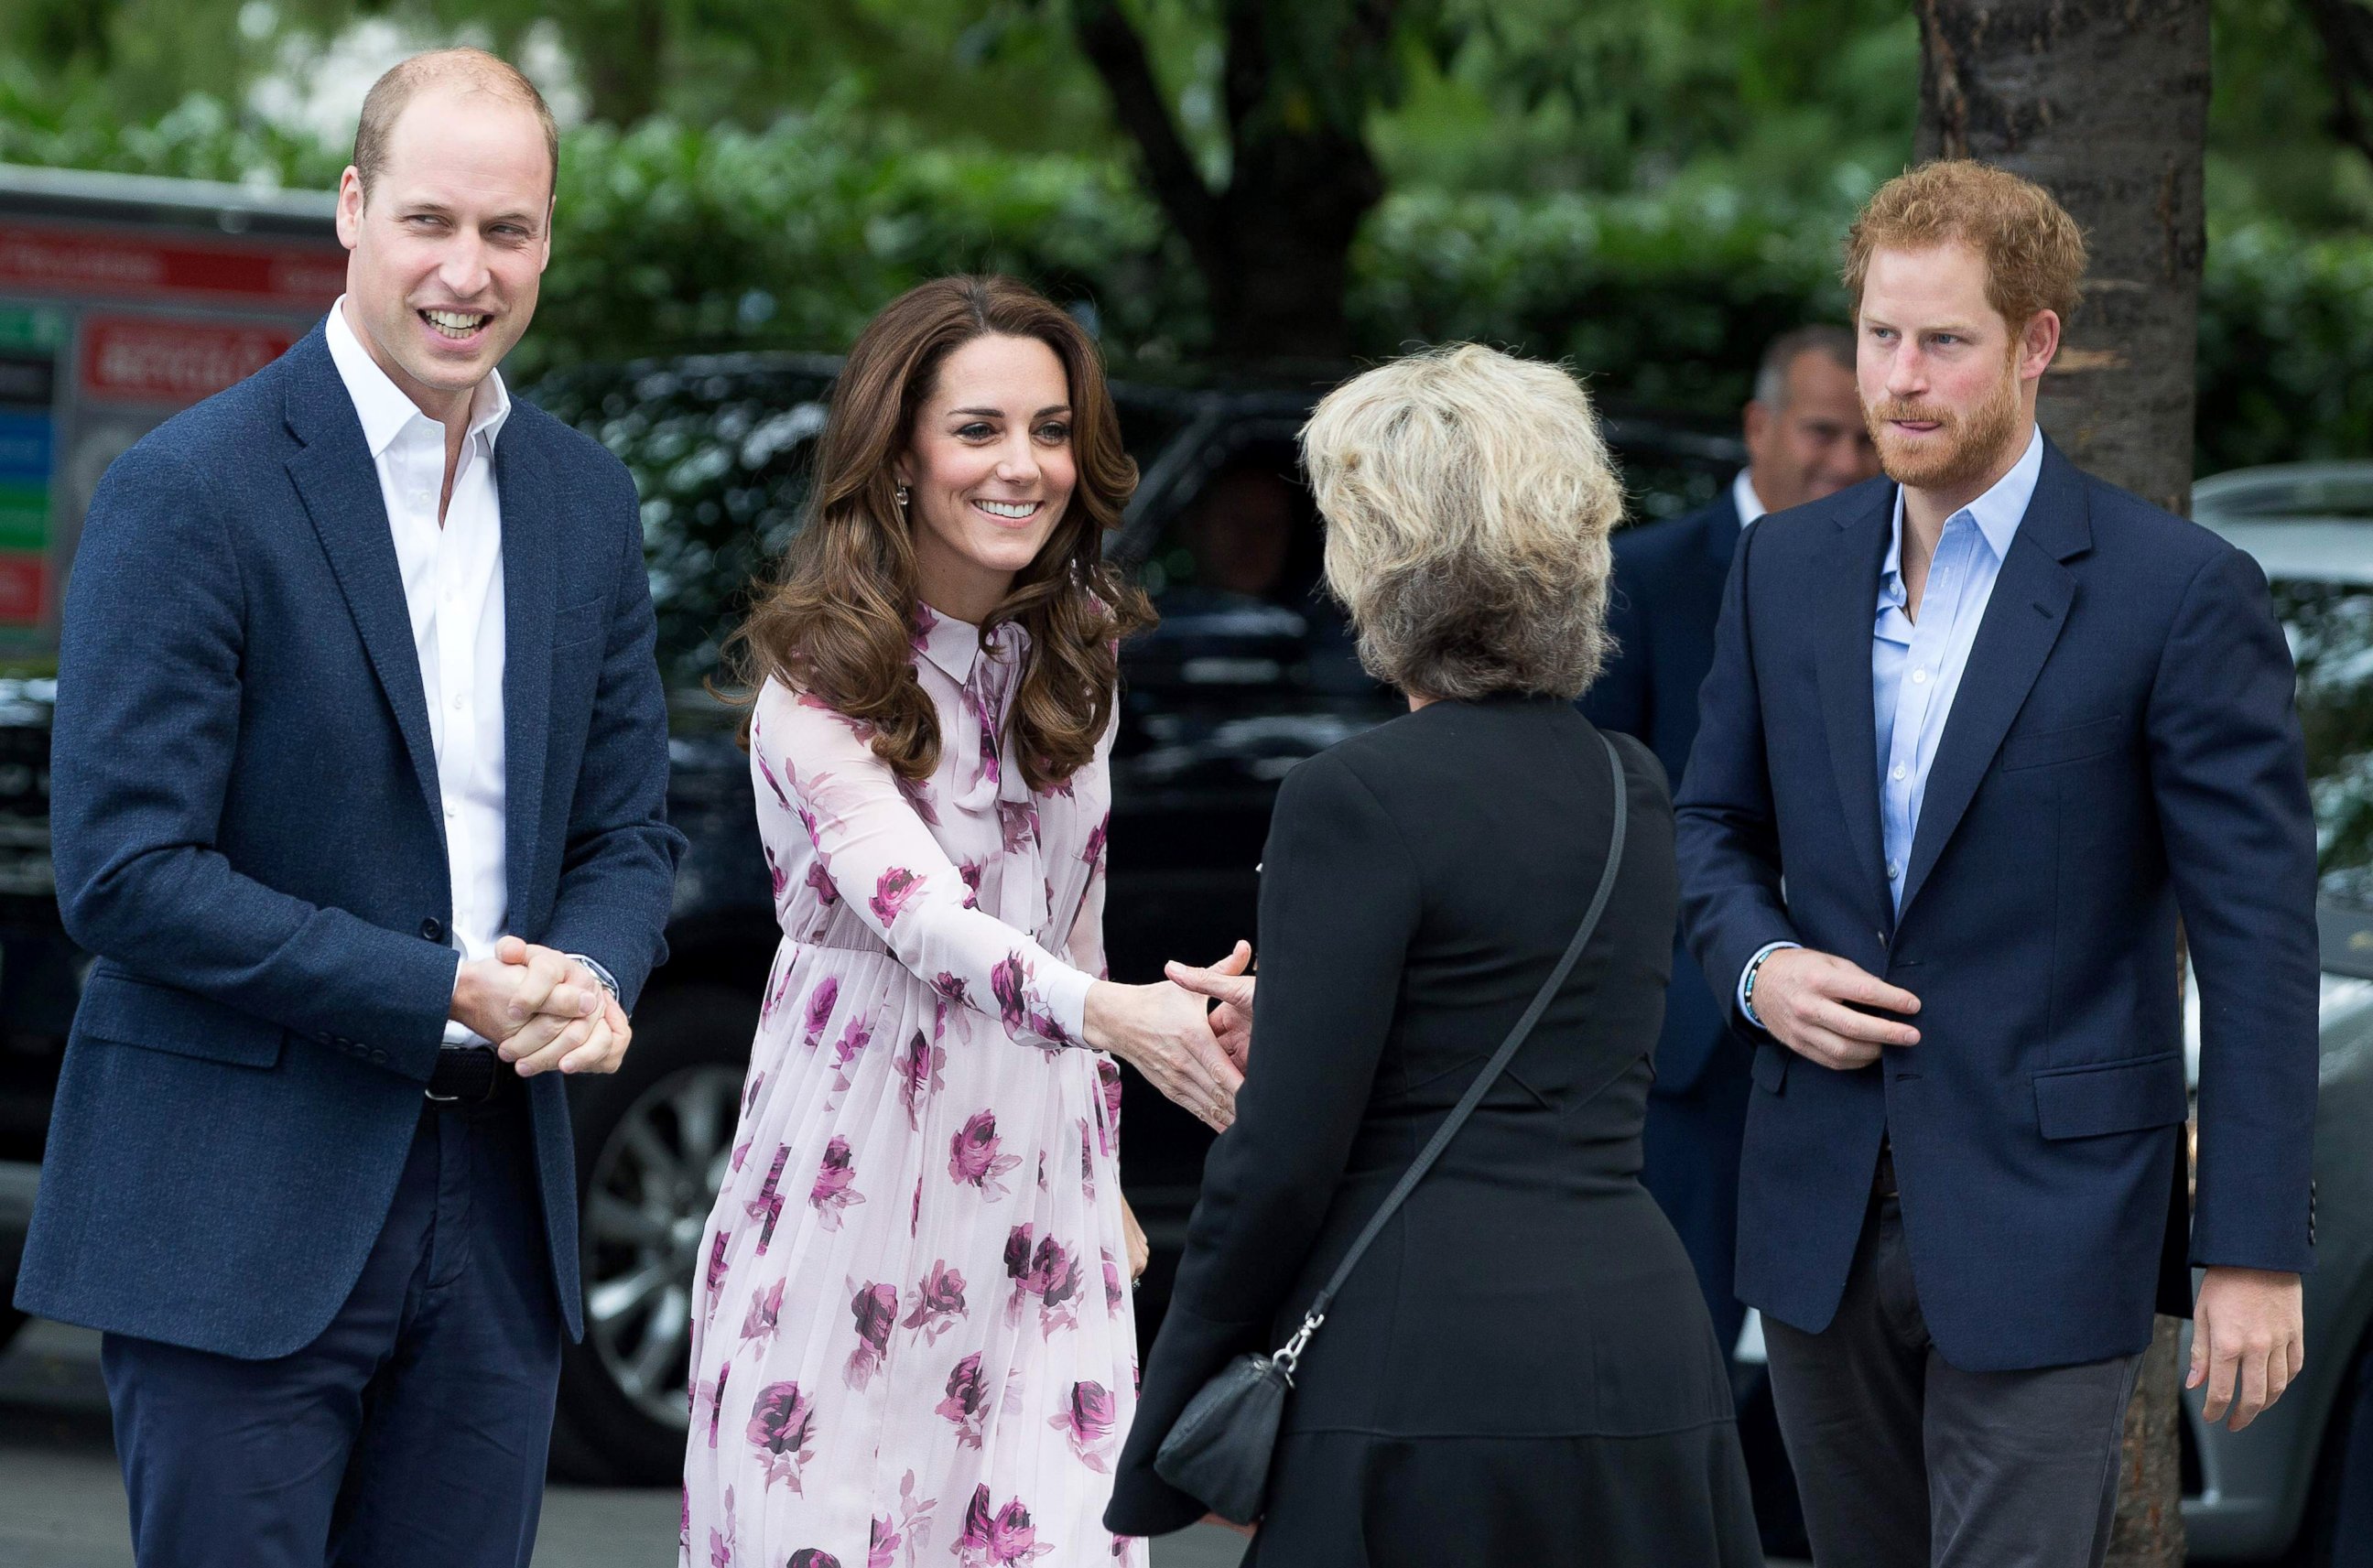 PHOTO: Britain's Prince William, Duke of Cambridge, Catherine, Duchess of Cambridge and Prince Harry are greeted as they arrive for a visit to County Hall and The London Eye Oct. 10, 2016, in London.